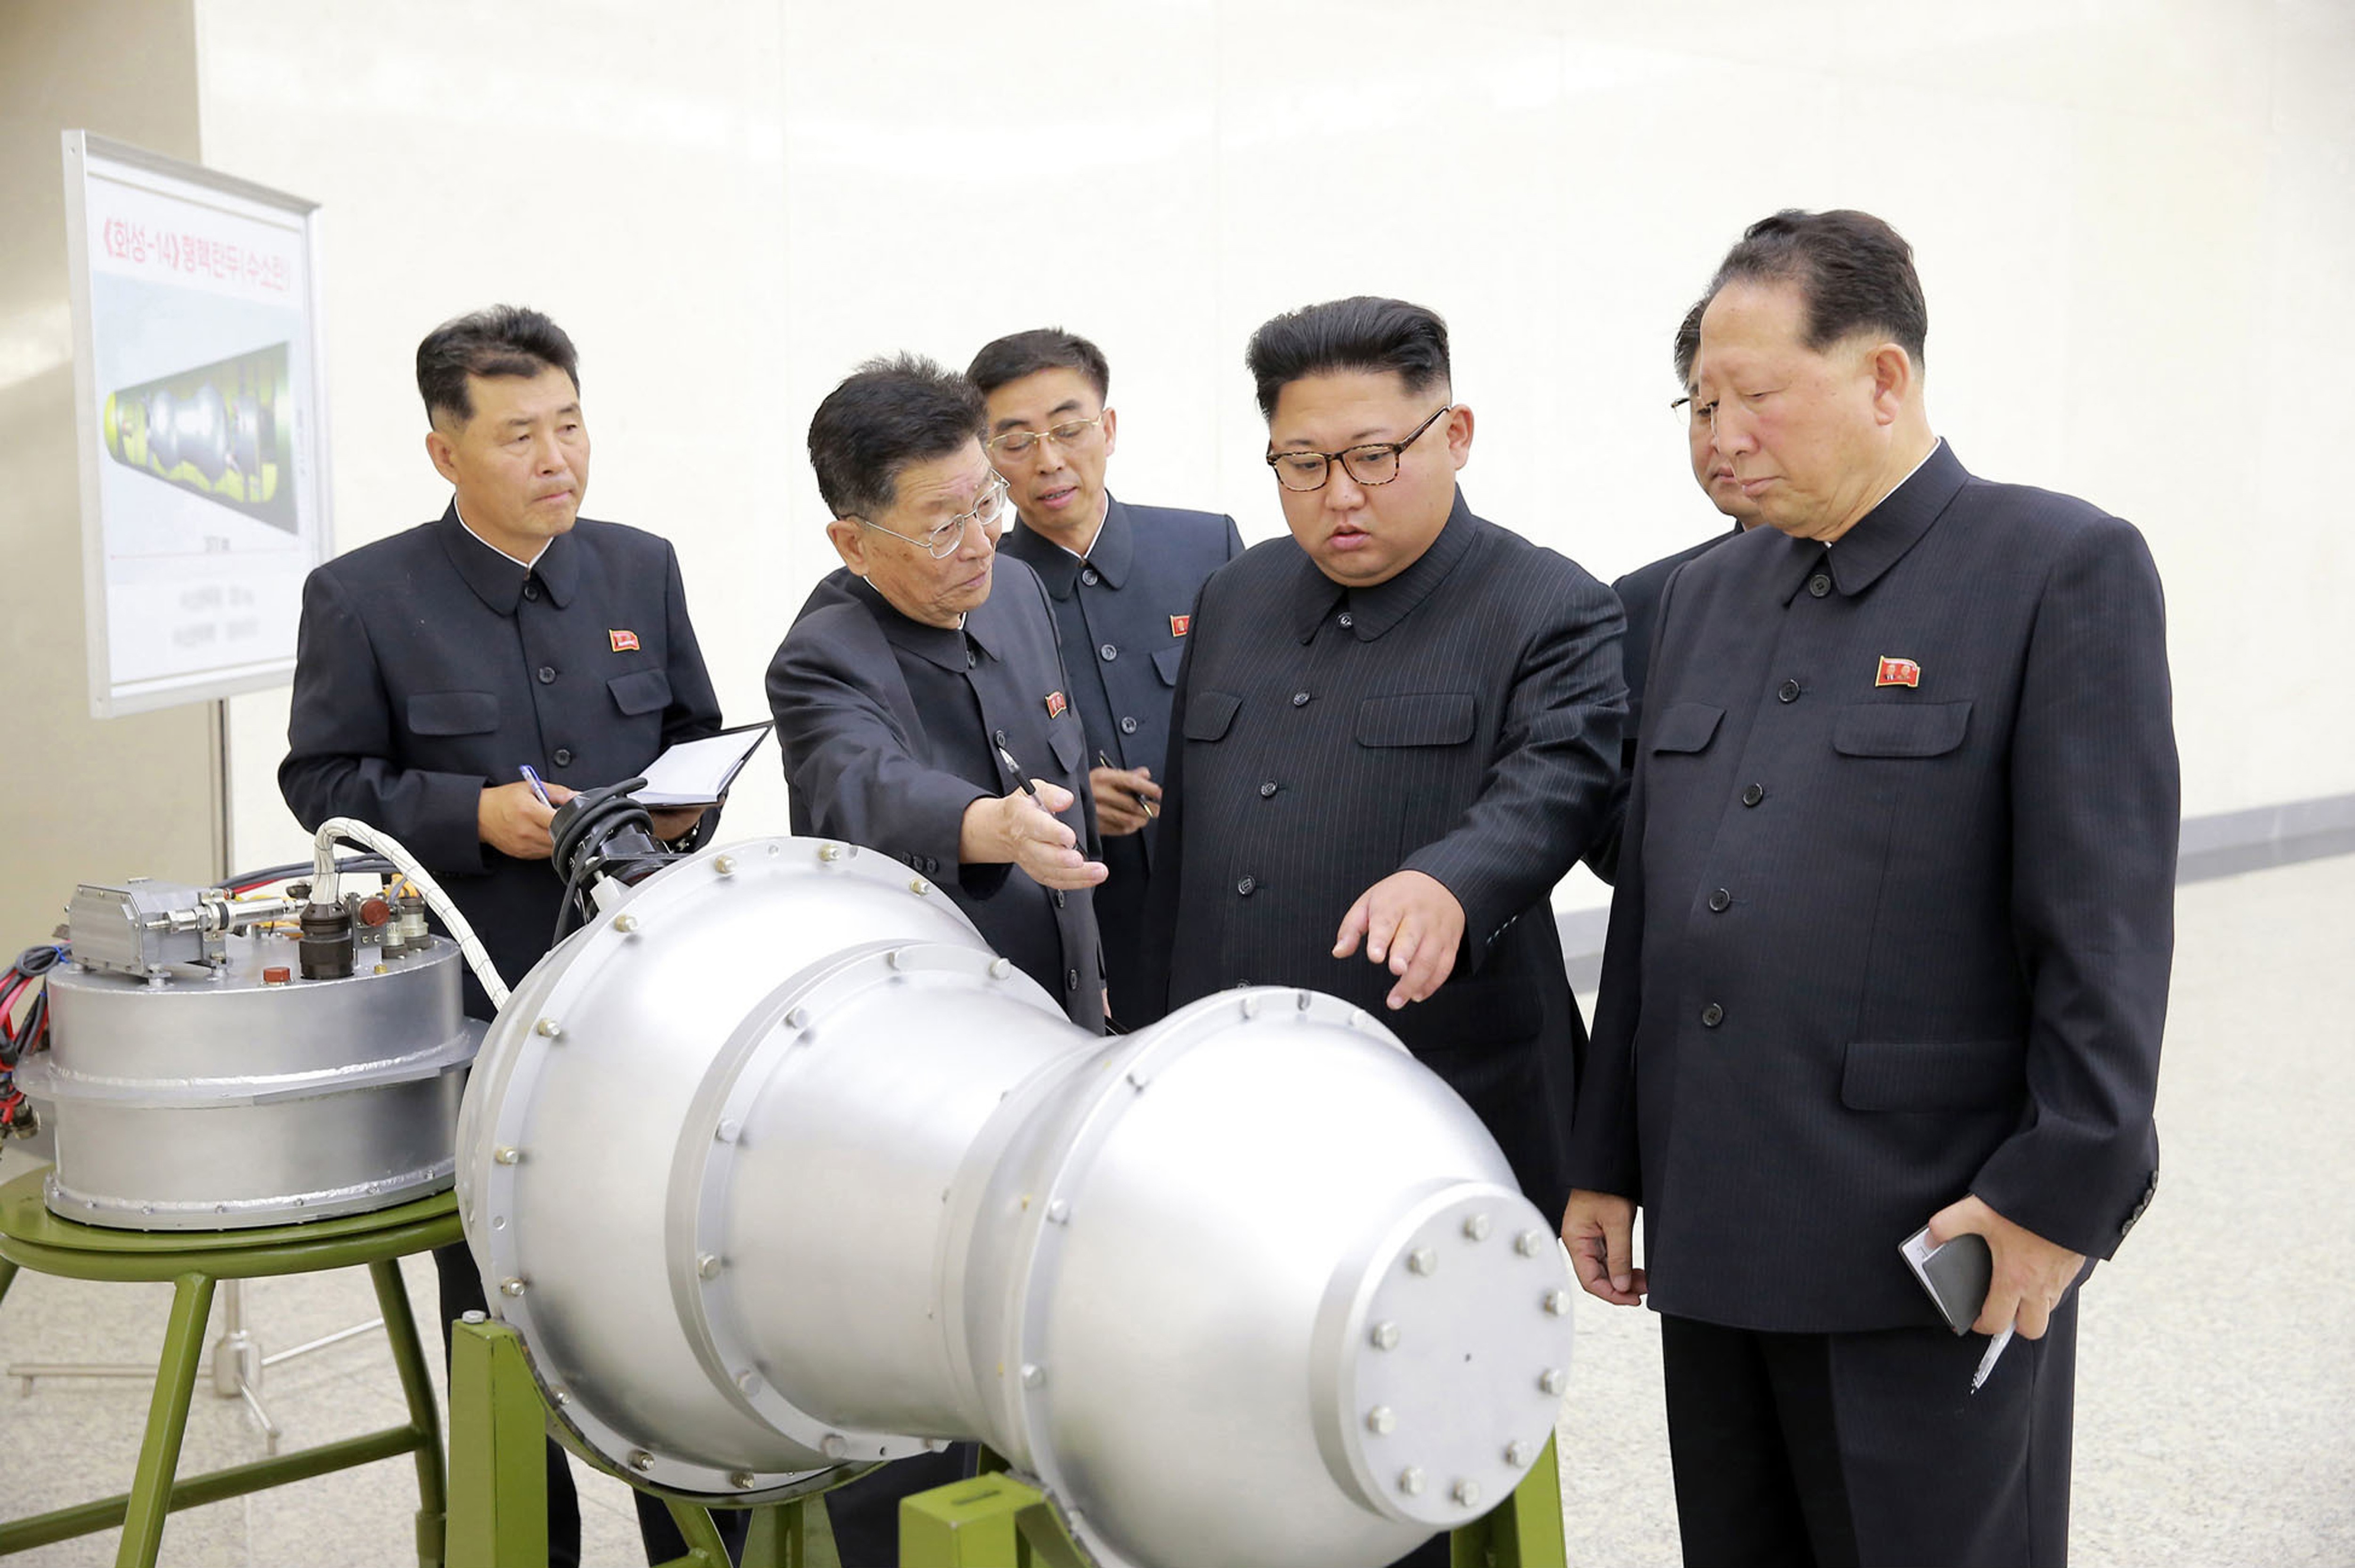 North Korean leader Kim Jong-un (second from right) inspects facilities at an undisclosed location in North Korea in September 2017 in a photograph released by his government. Photo: KCNA via AP